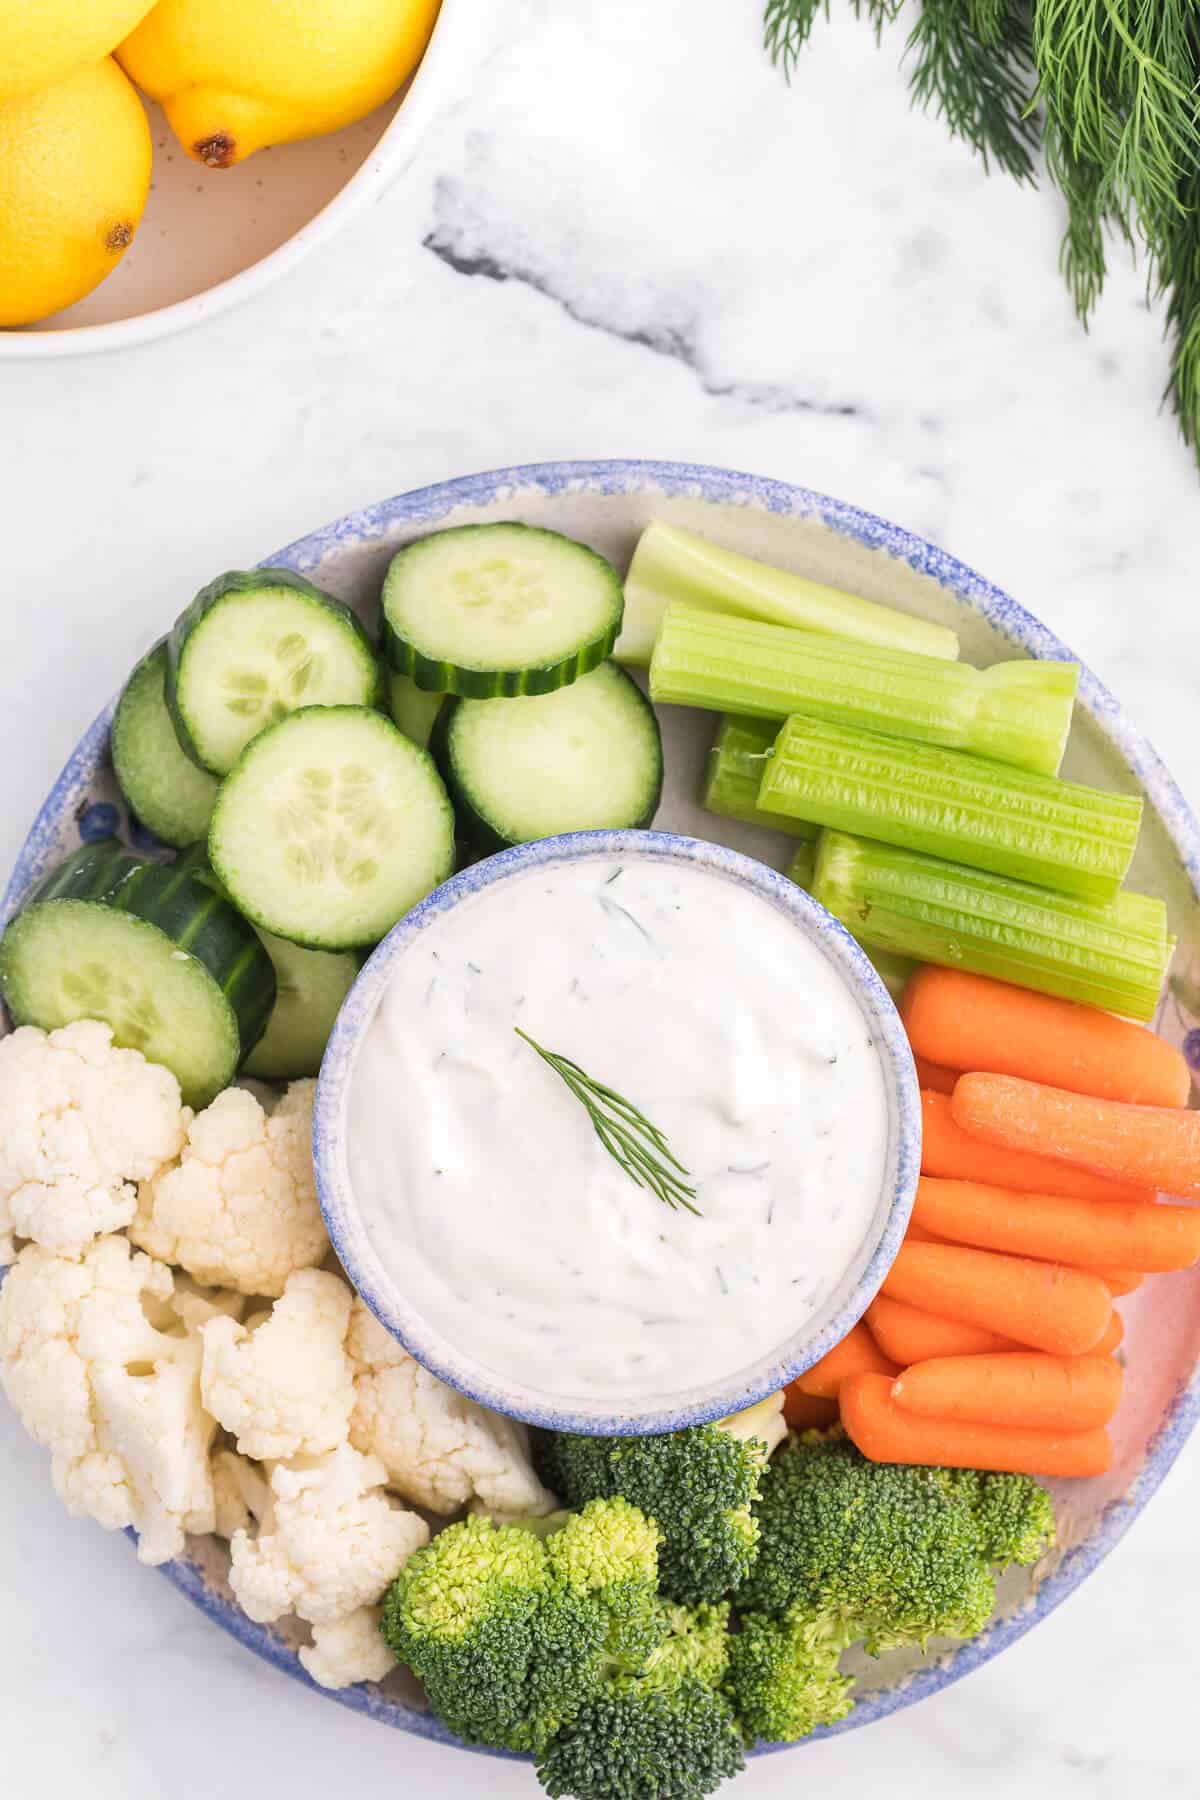 Lemon Dill Dip - Creamy with a hint of tang and fresh dill flavour. You are going to love eating this one with some fresh veggies!